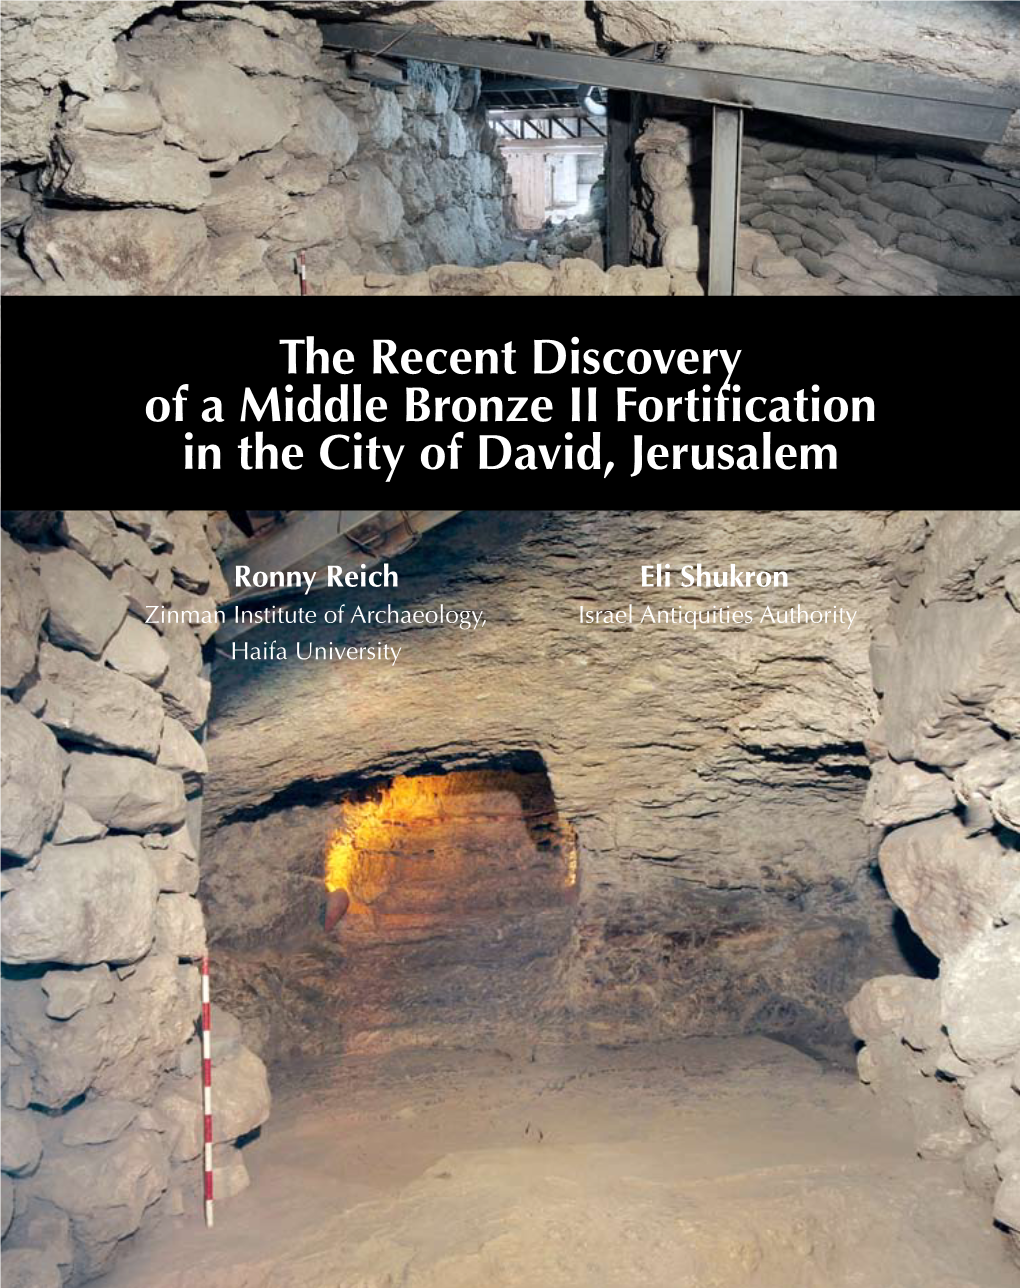 The Recent Discovery of a Middle Bronze II Fortification in the City of David, Jerusalem